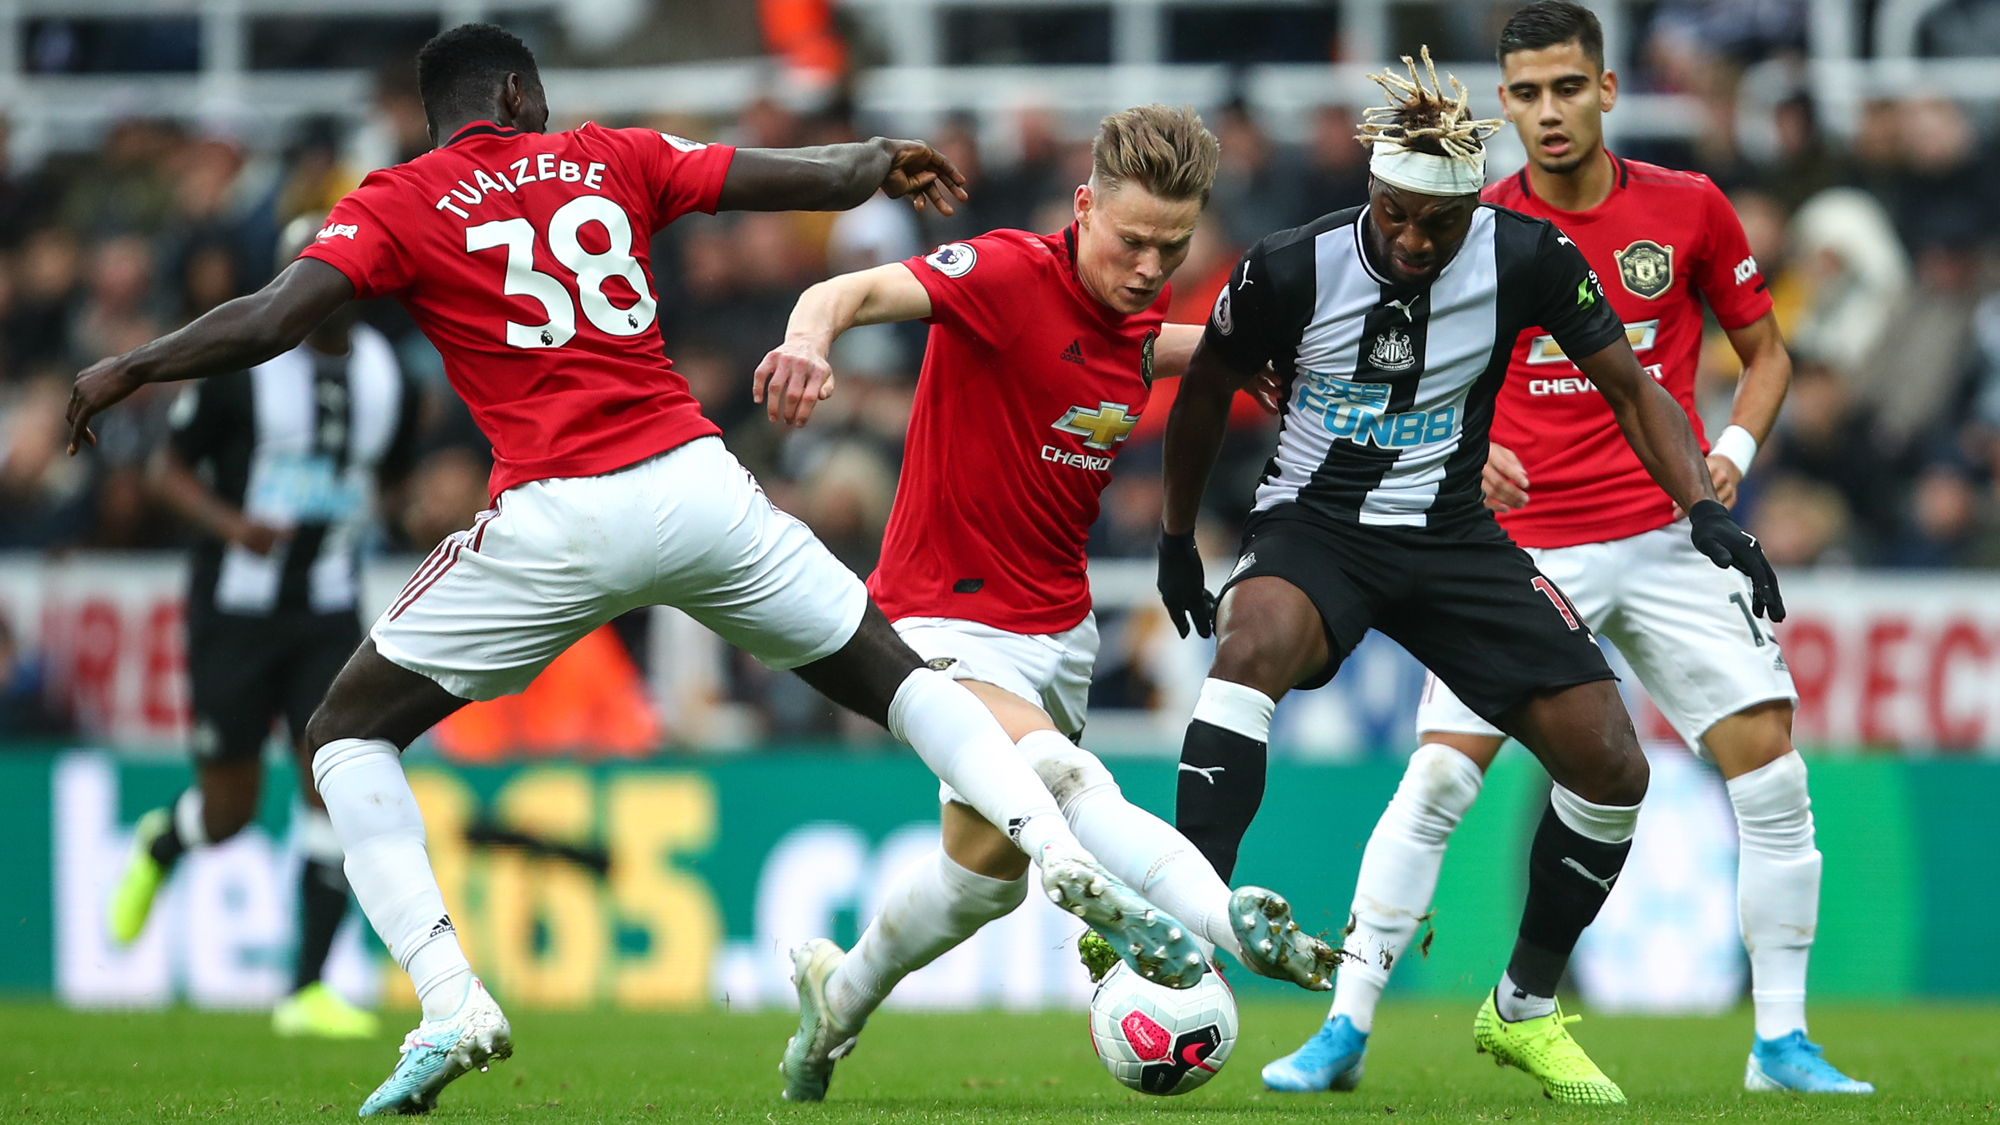 Live stream Newcastle vs Man United: Prime's got one of the best ways